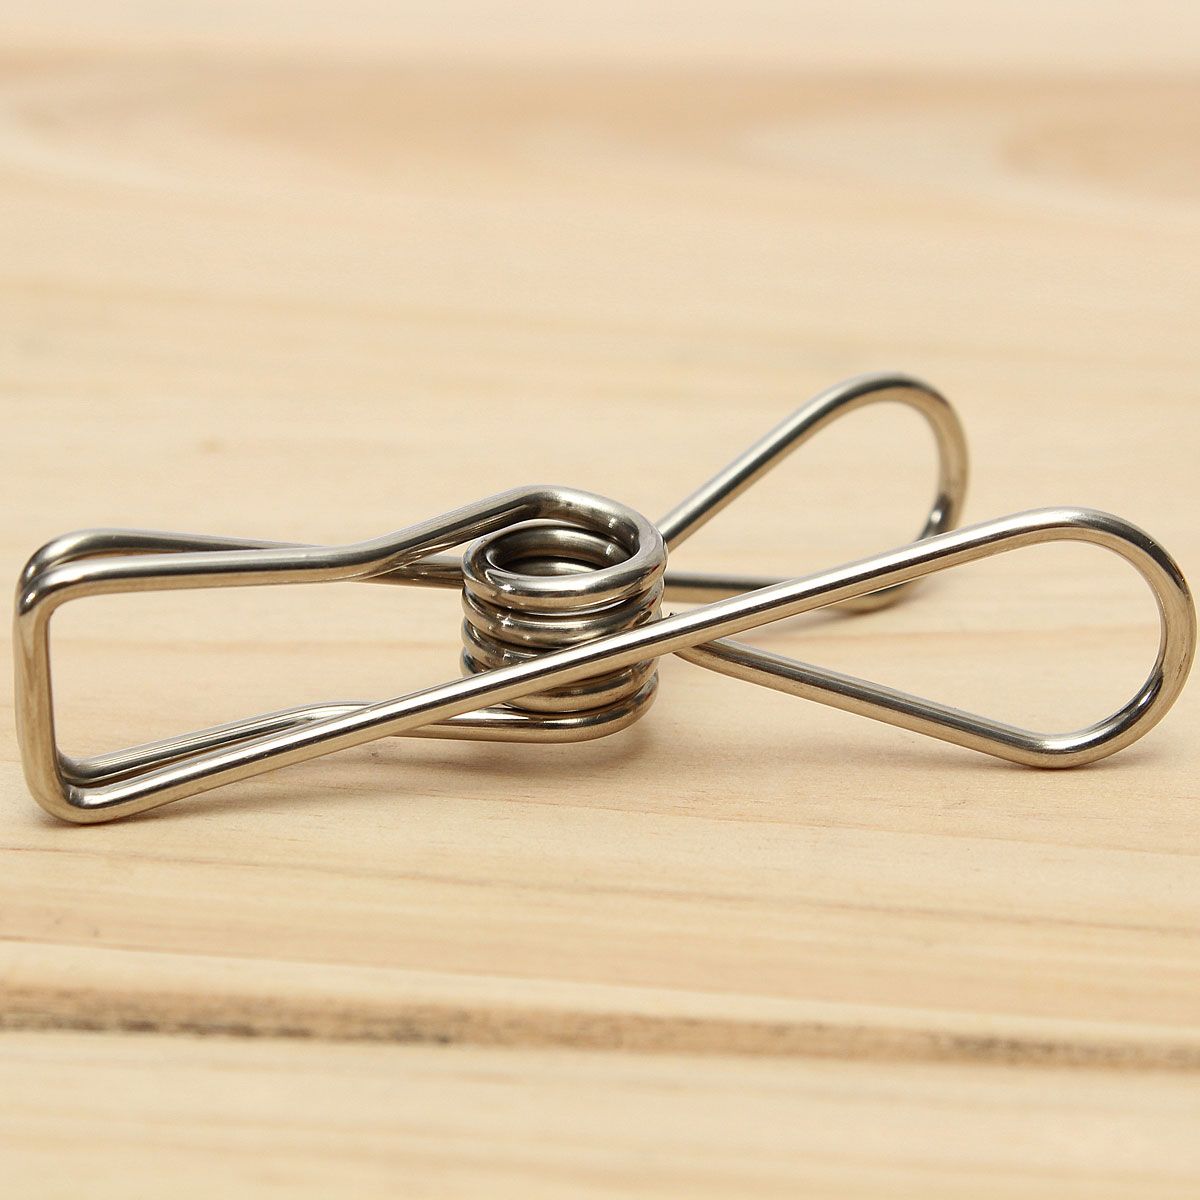 10Pcs-Stainless-Steel-Clothes-Pegs-Hanging-Pin-Laundry-Windproof-Clips-Home-Clamps-Clothespins-1333048